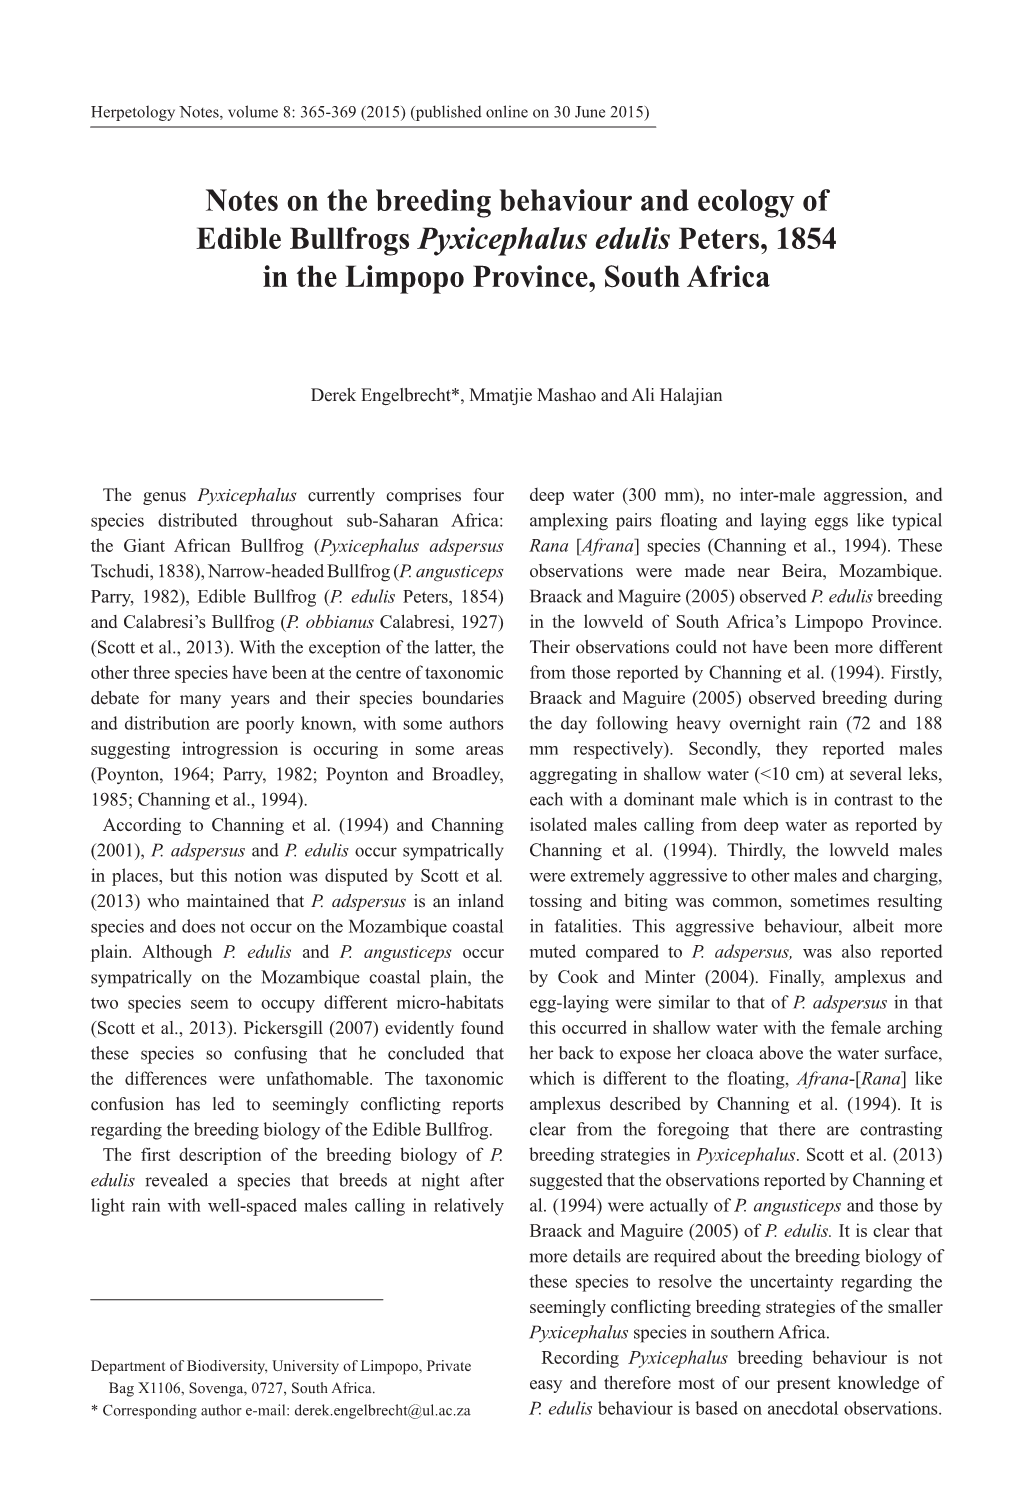 Notes on the Breeding Behaviour and Ecology of Edible Bullfrogs Pyxicephalus Edulis Peters, 1854 in the Limpopo Province, South Africa